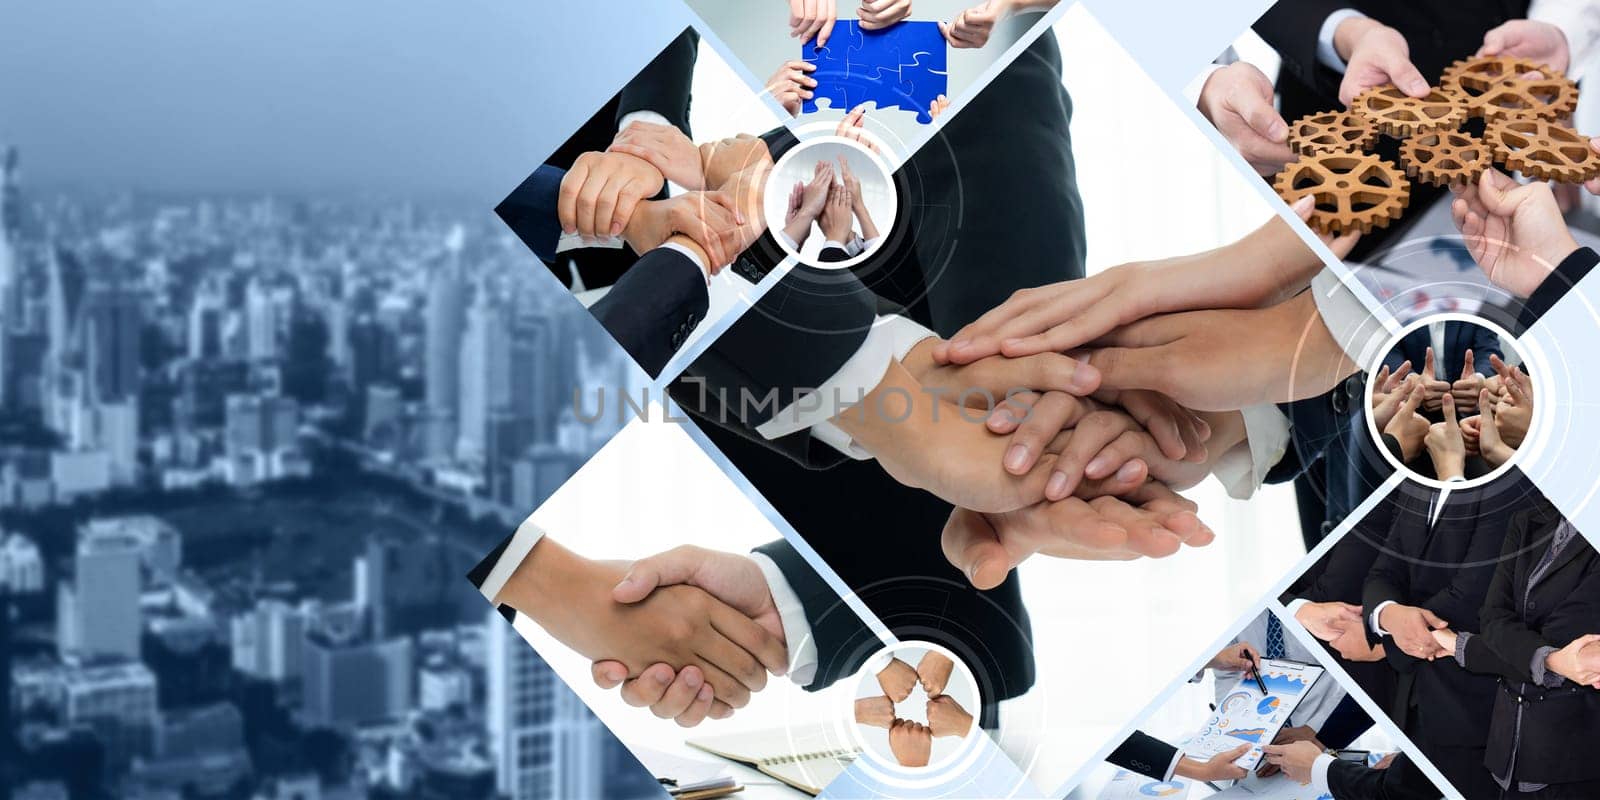 Teamwork and human resources HR management technology for business kudos by biancoblue